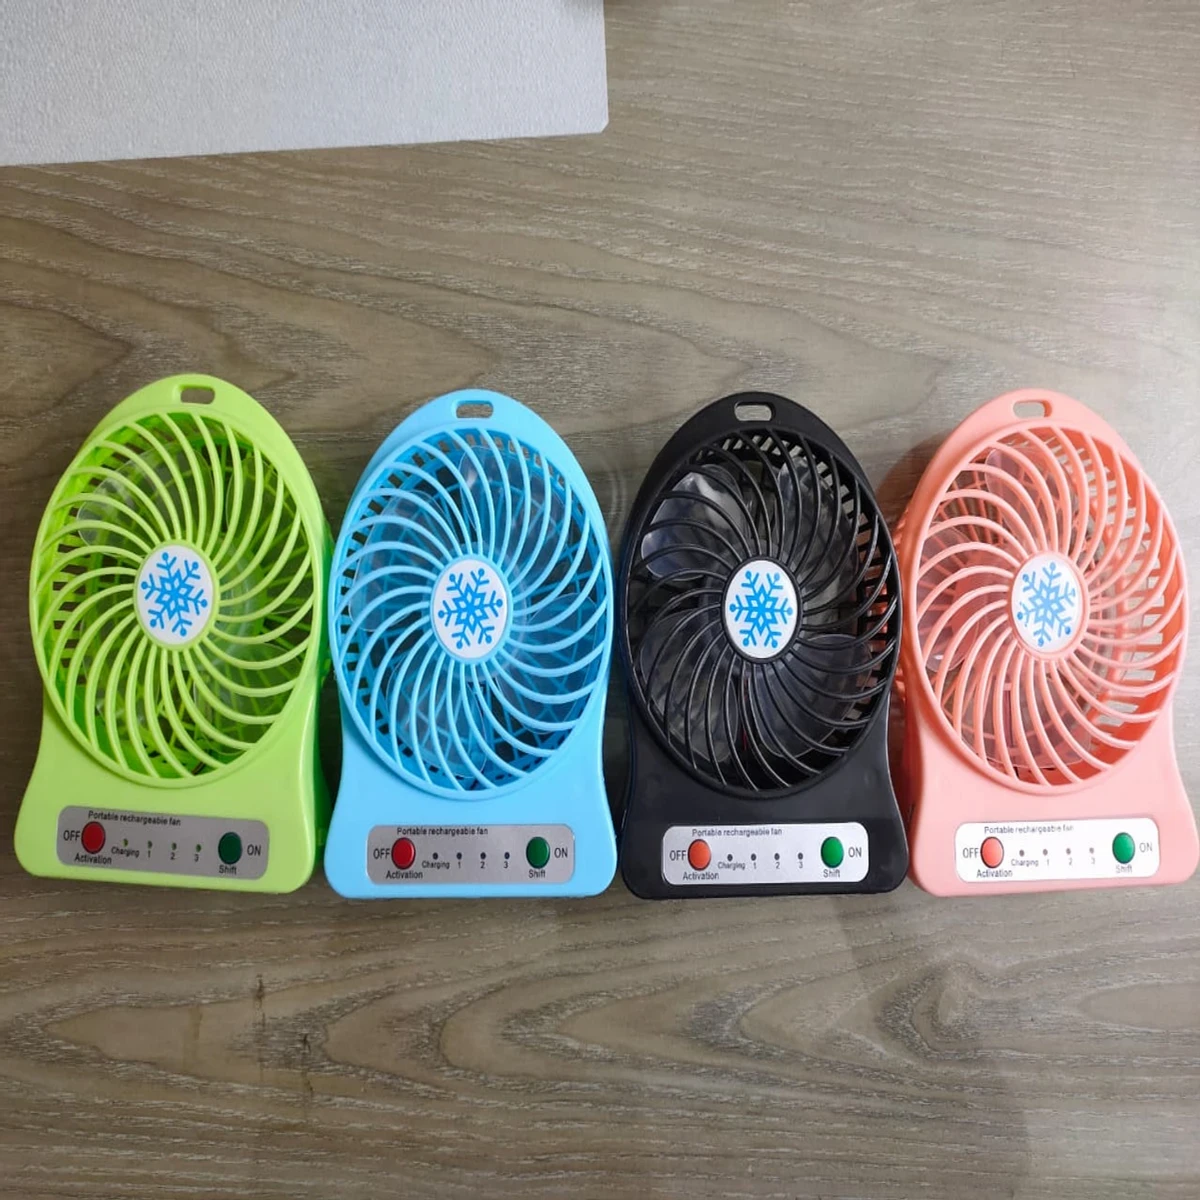 RECHARGEABLE MINI FAN WITH LIGHT